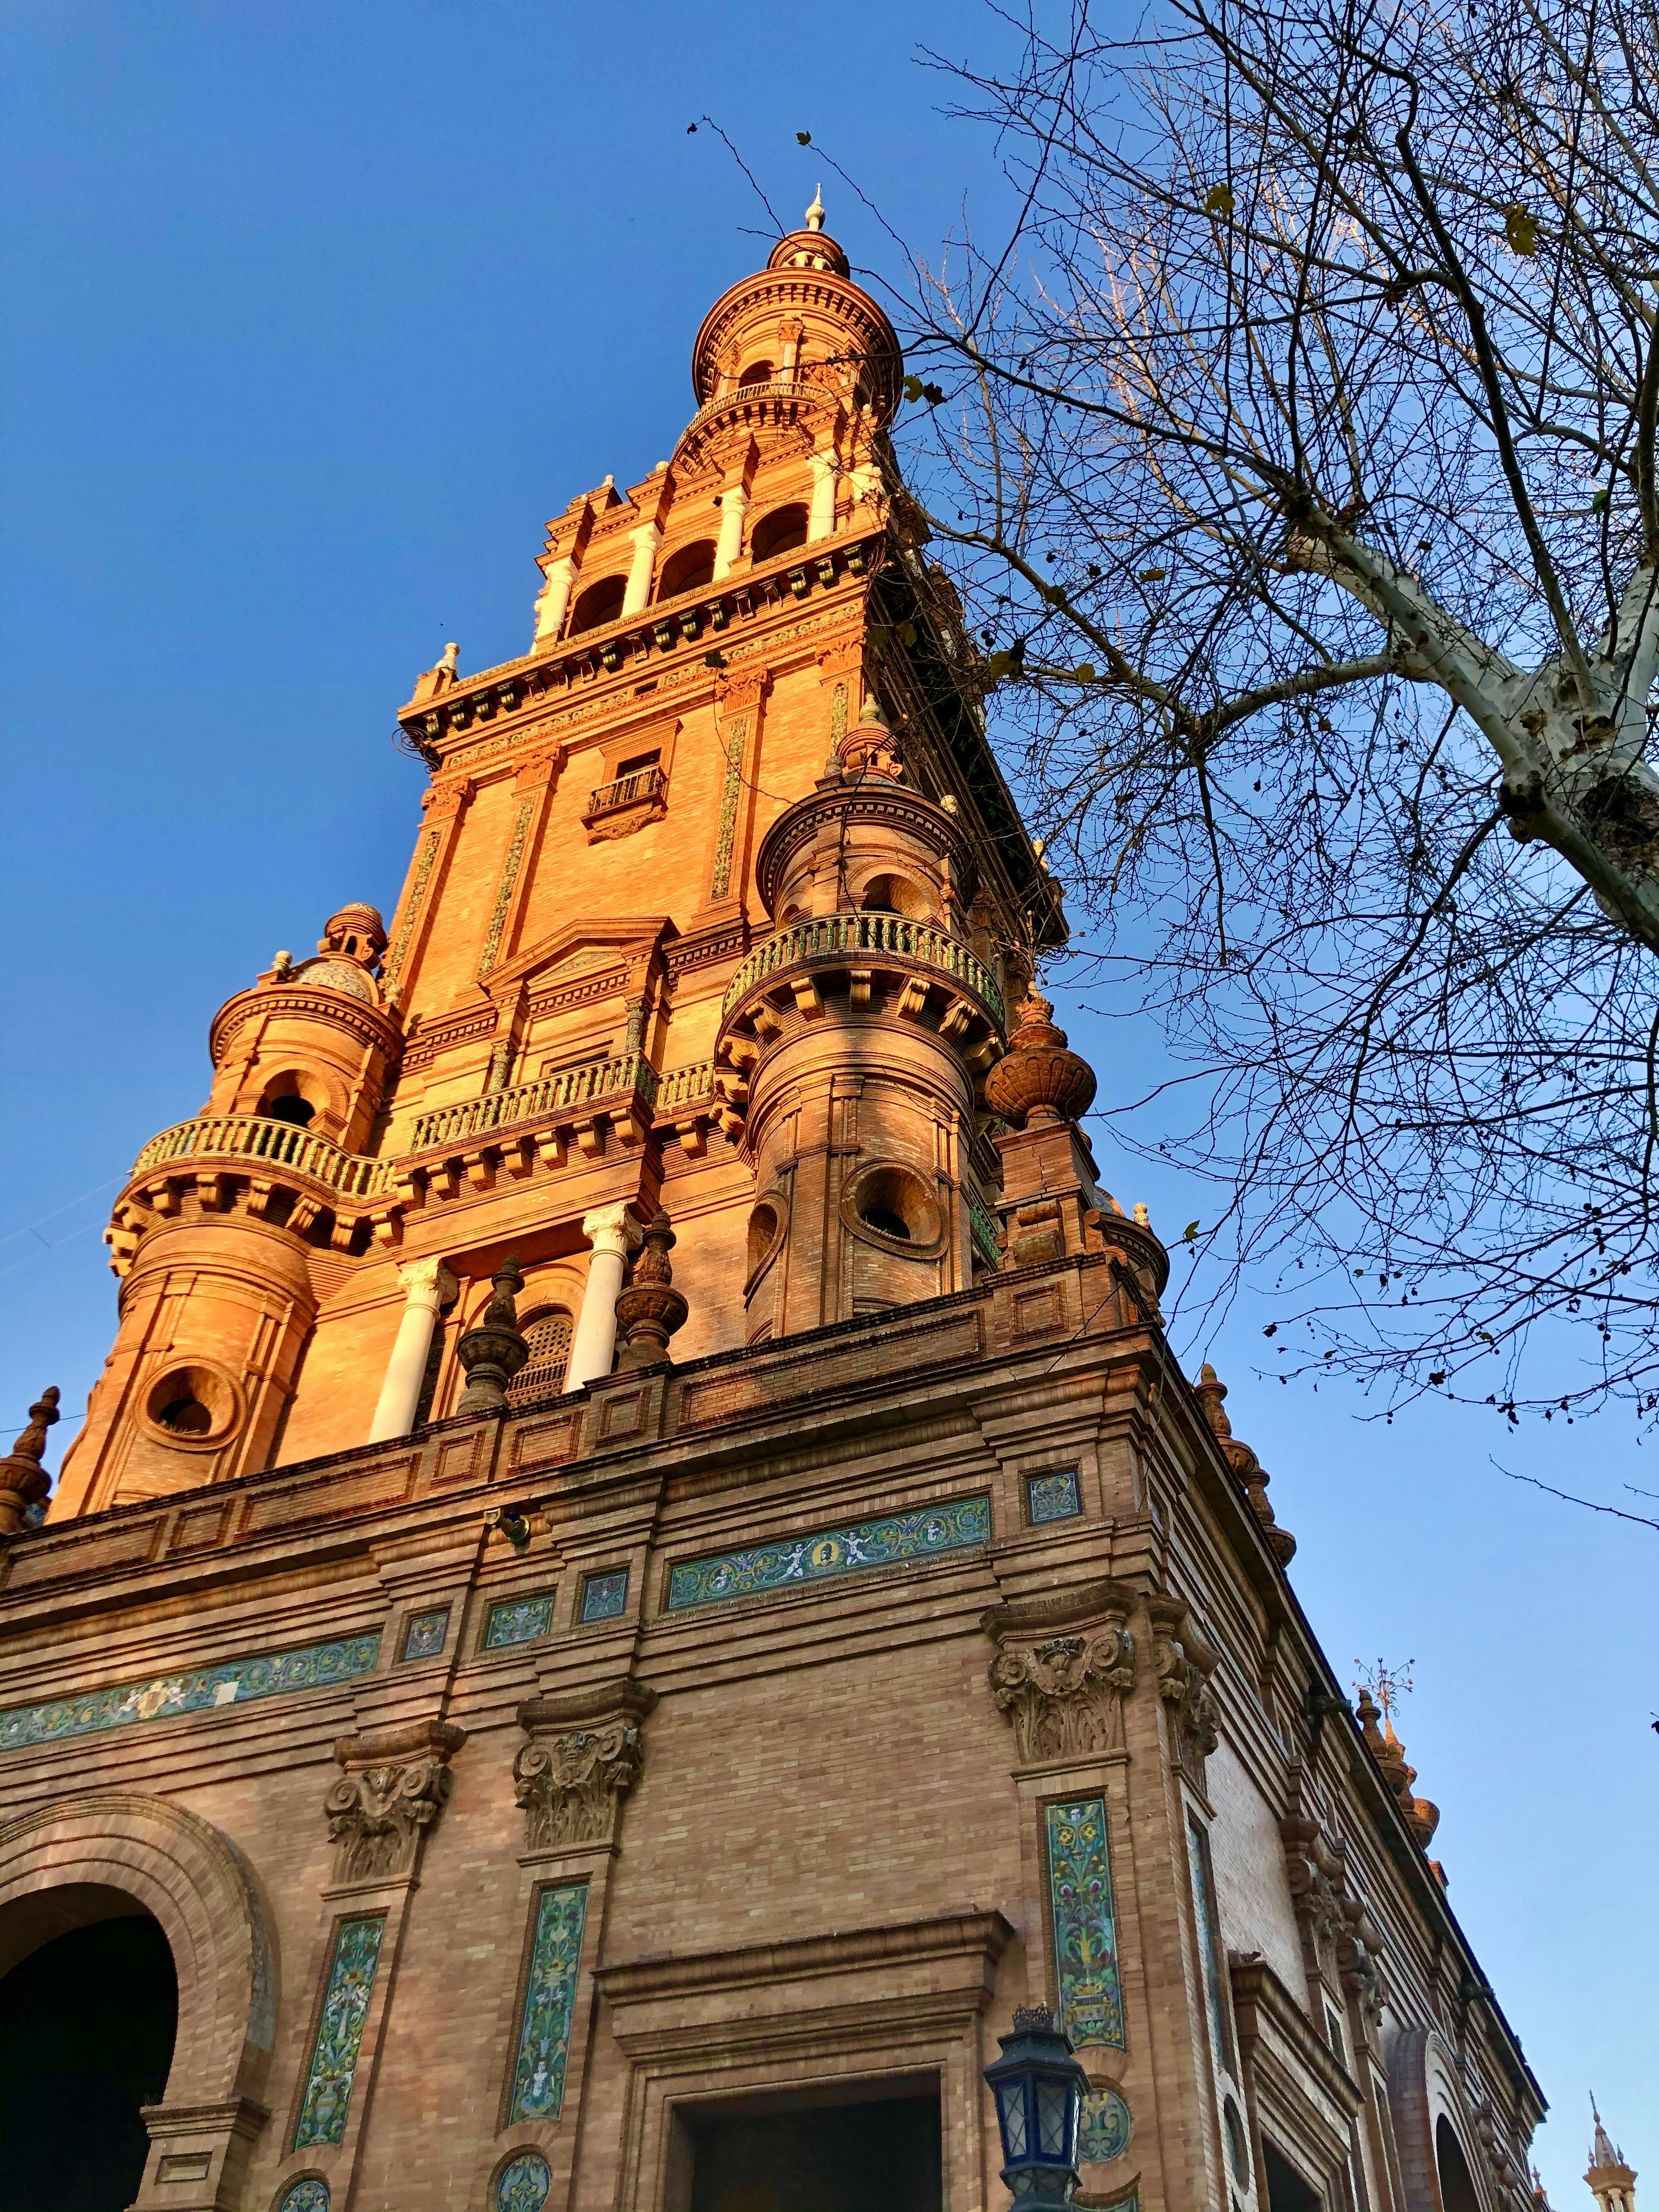 One of the towers at Plaza de Espana in Seville, Spain during sunset. An ideal starting point for travelers to explore the many beautiful sights in this ancient city.